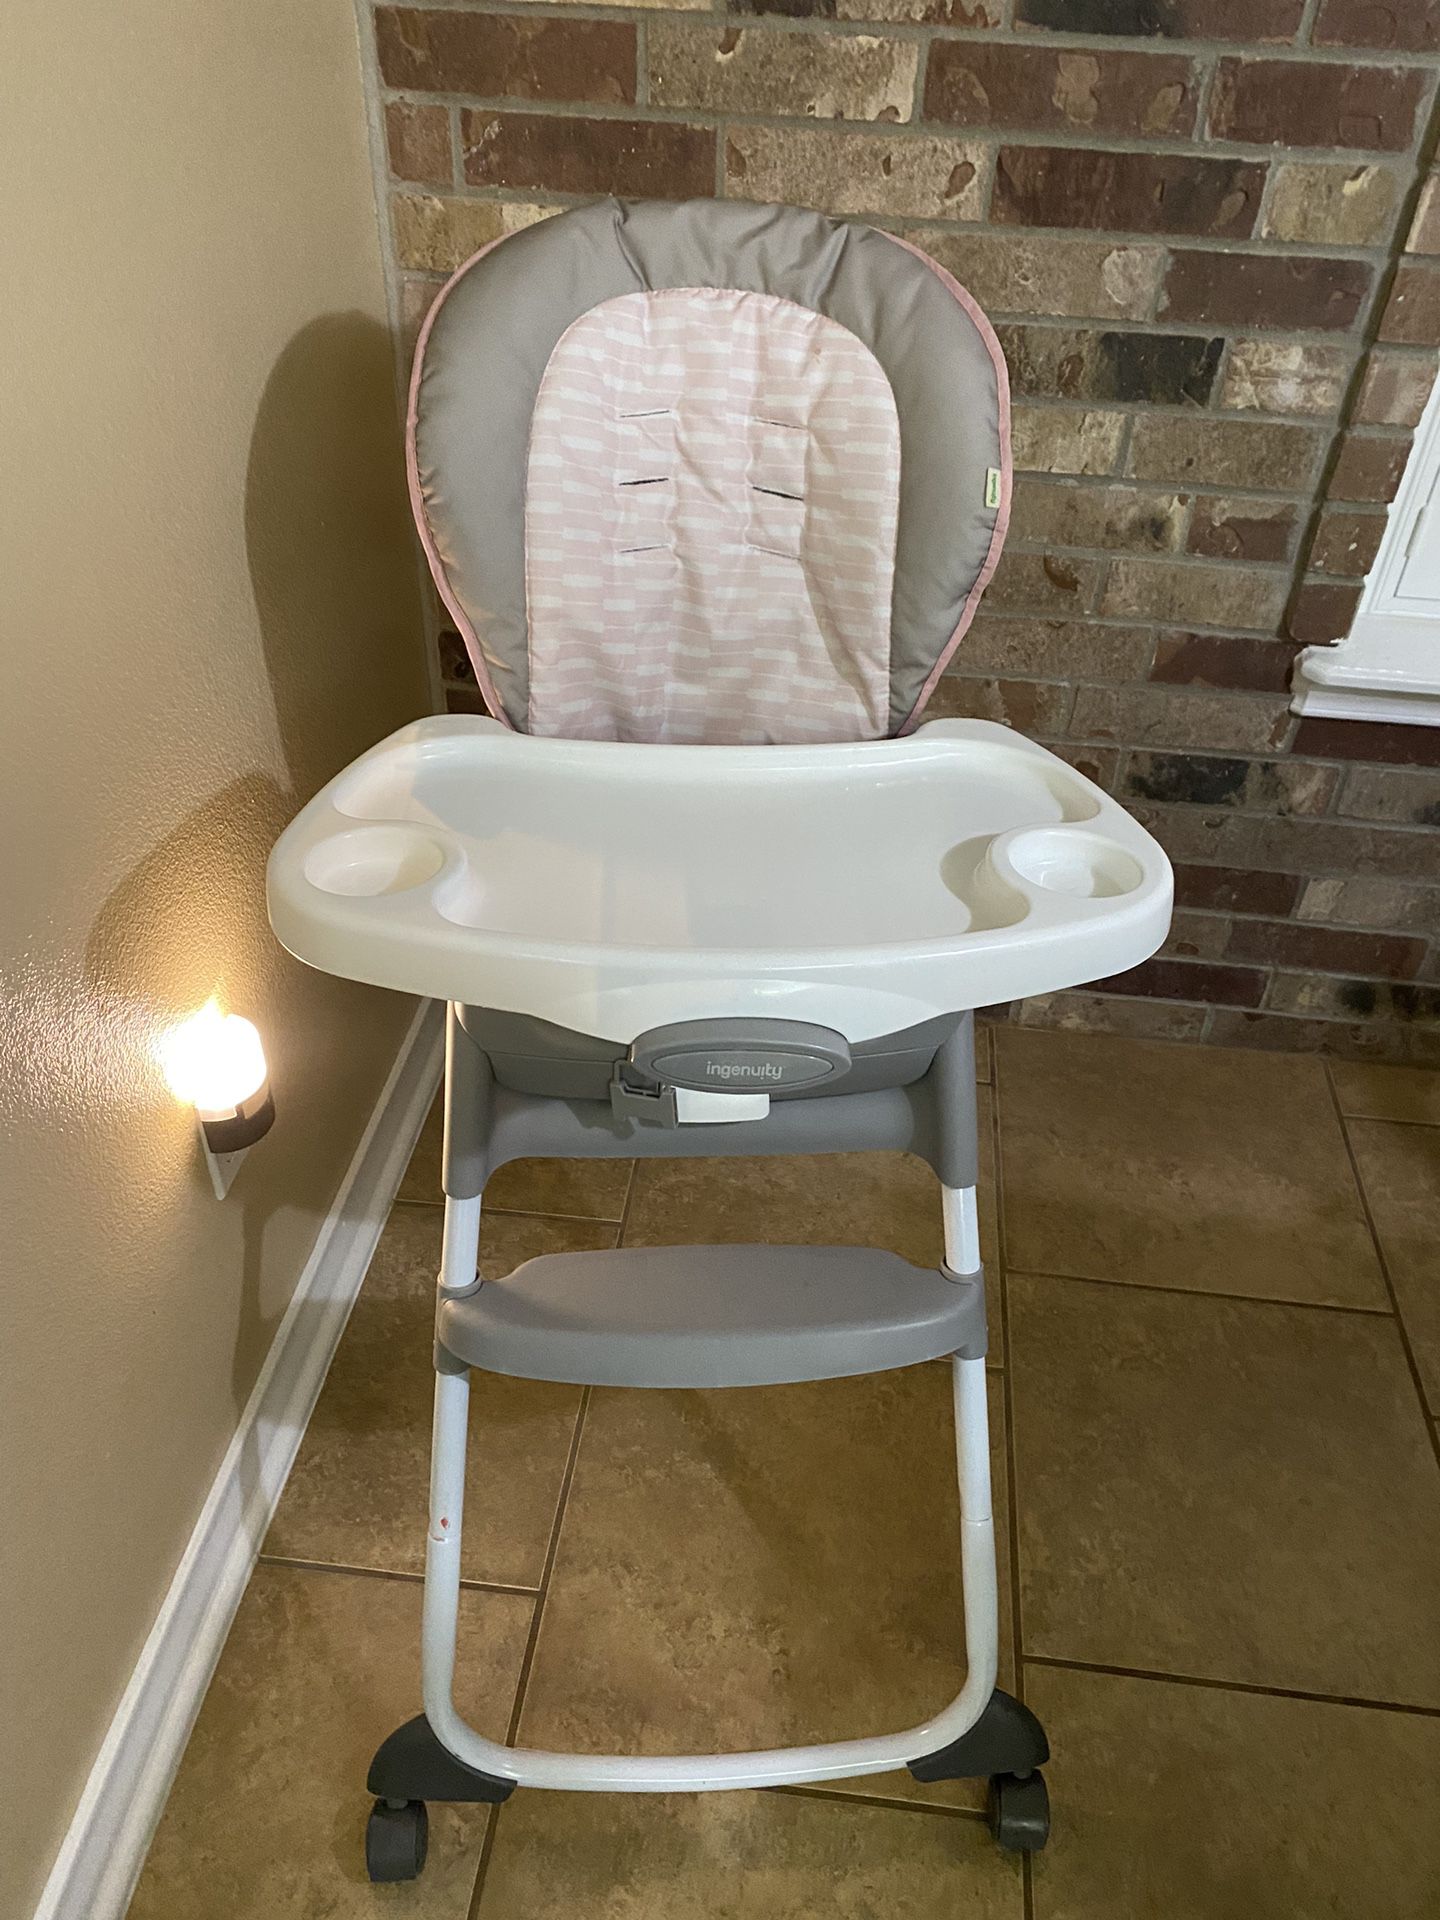 High chair For sale!